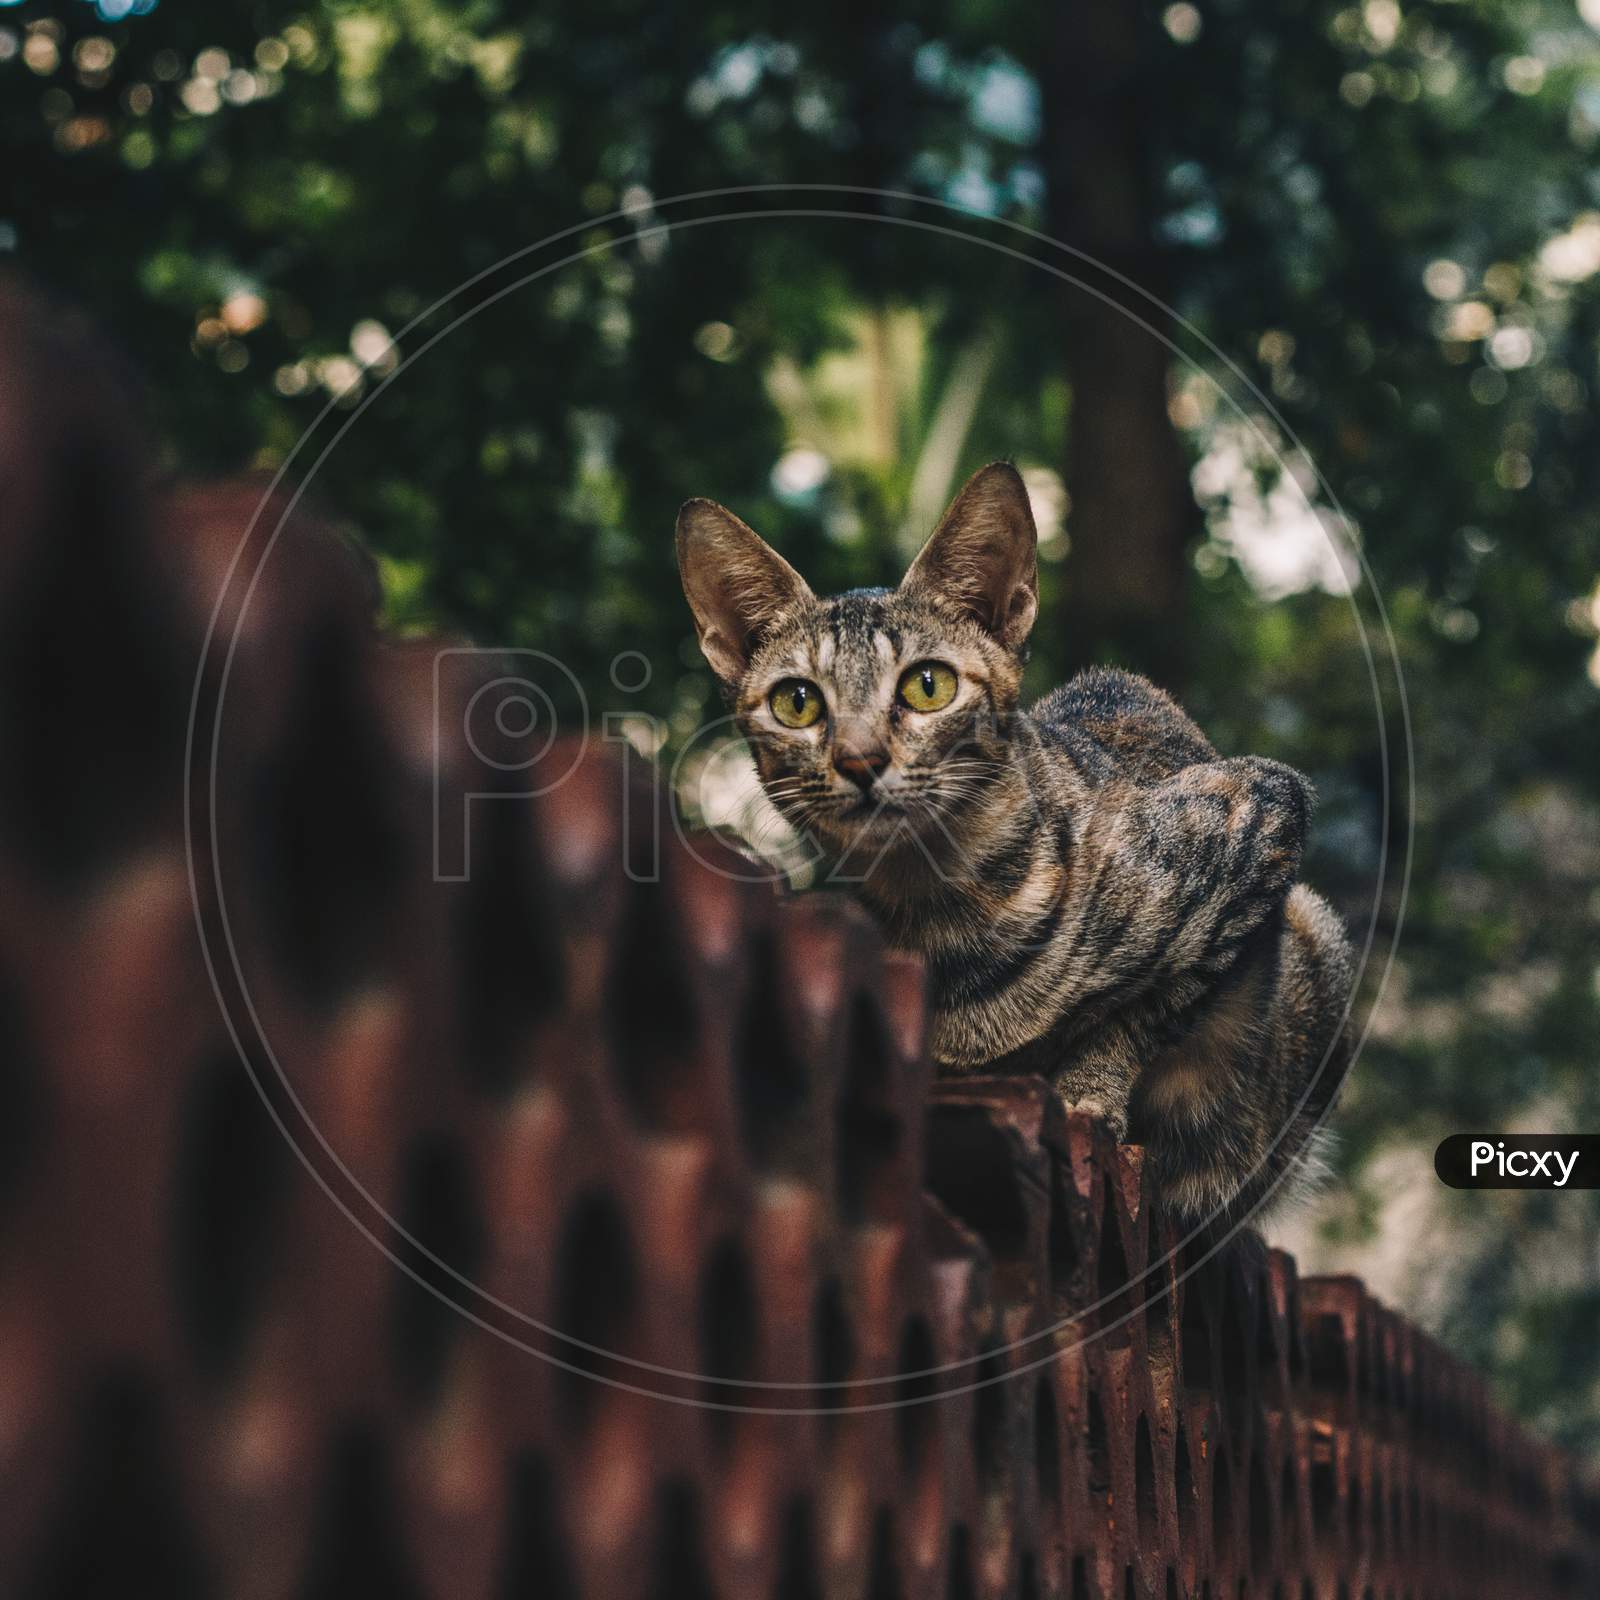 Portrait Of A Tabby Cat Sitting On A Wall In A Garden